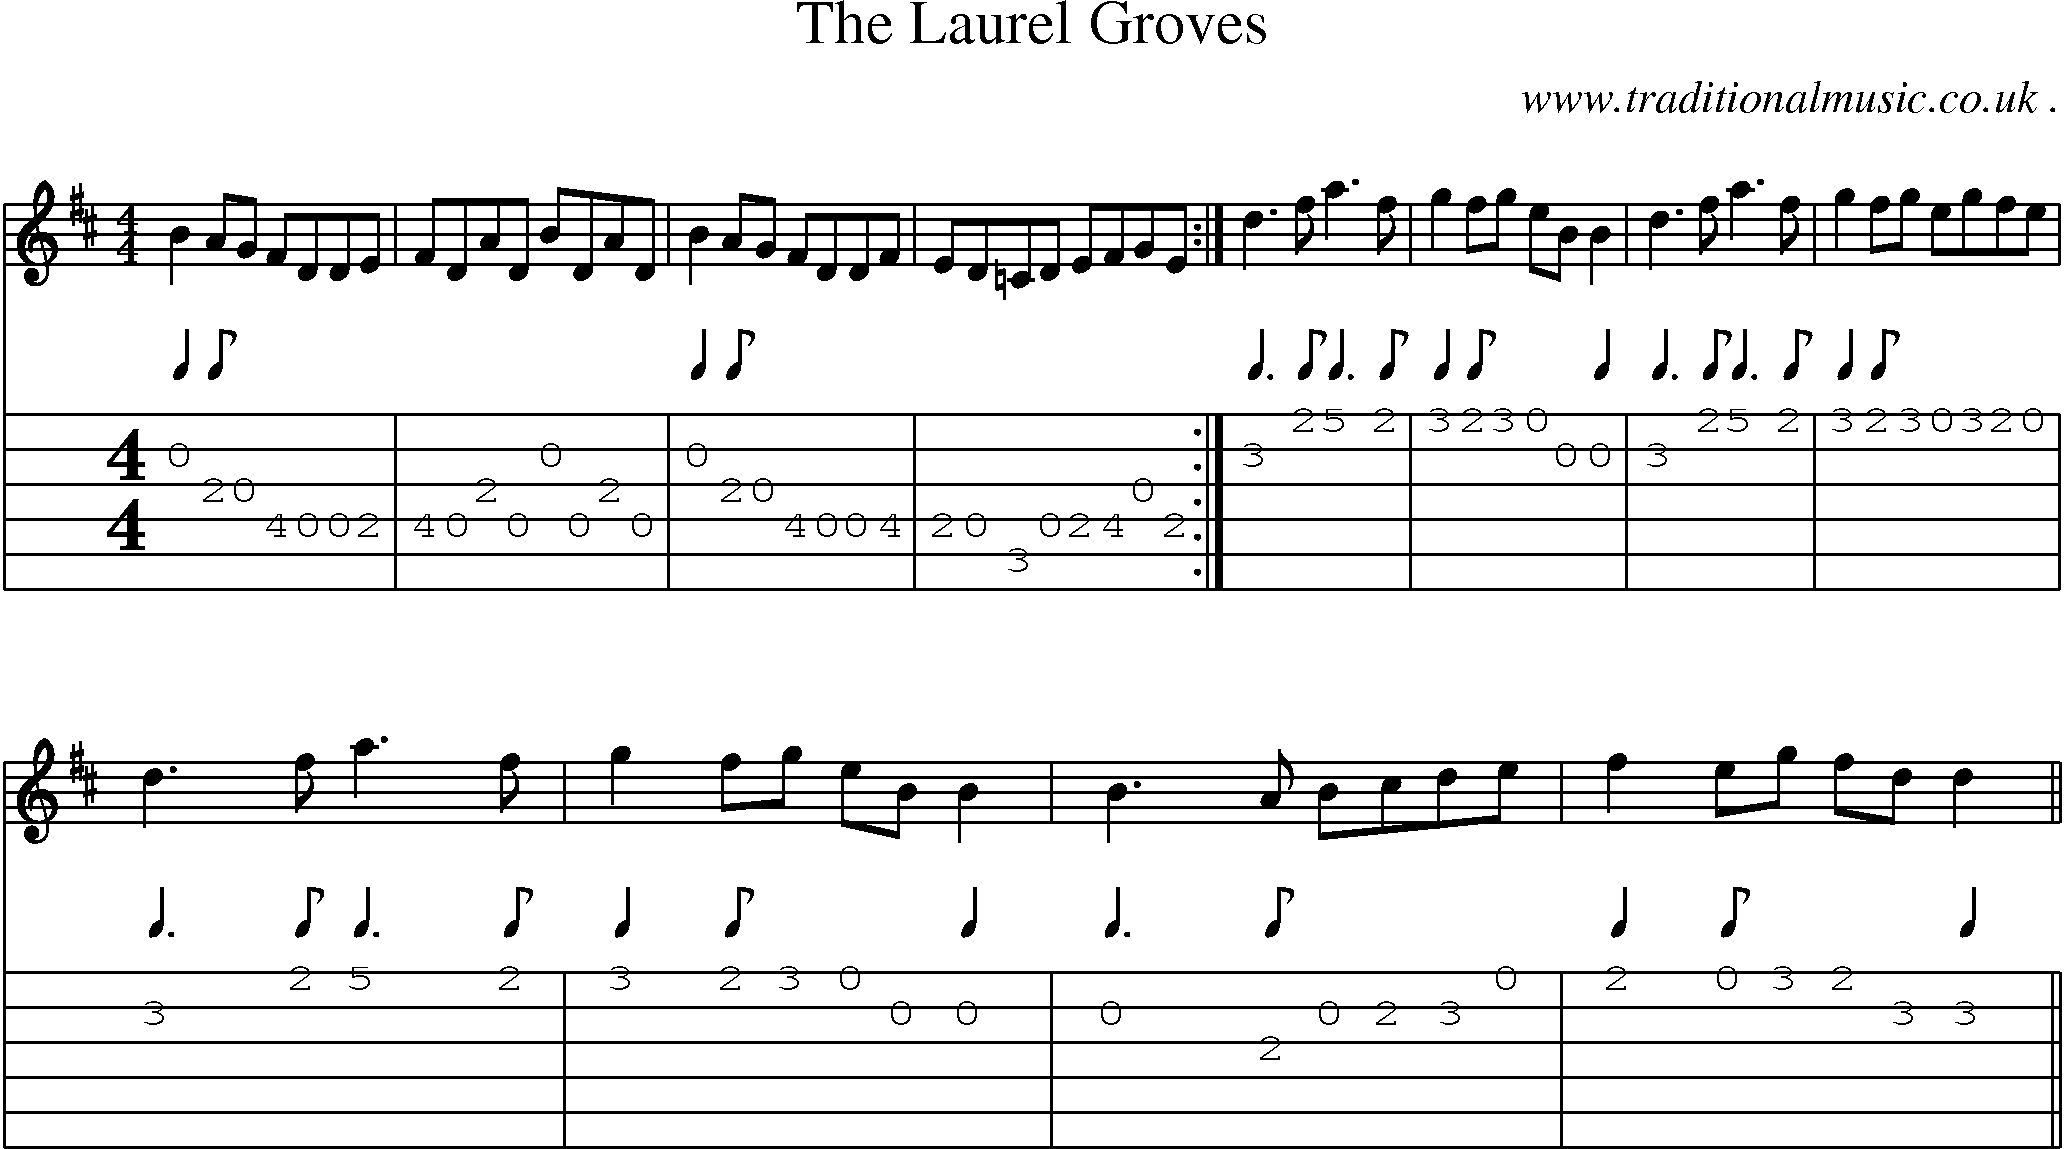 Sheet-Music and Guitar Tabs for The Laurel Groves